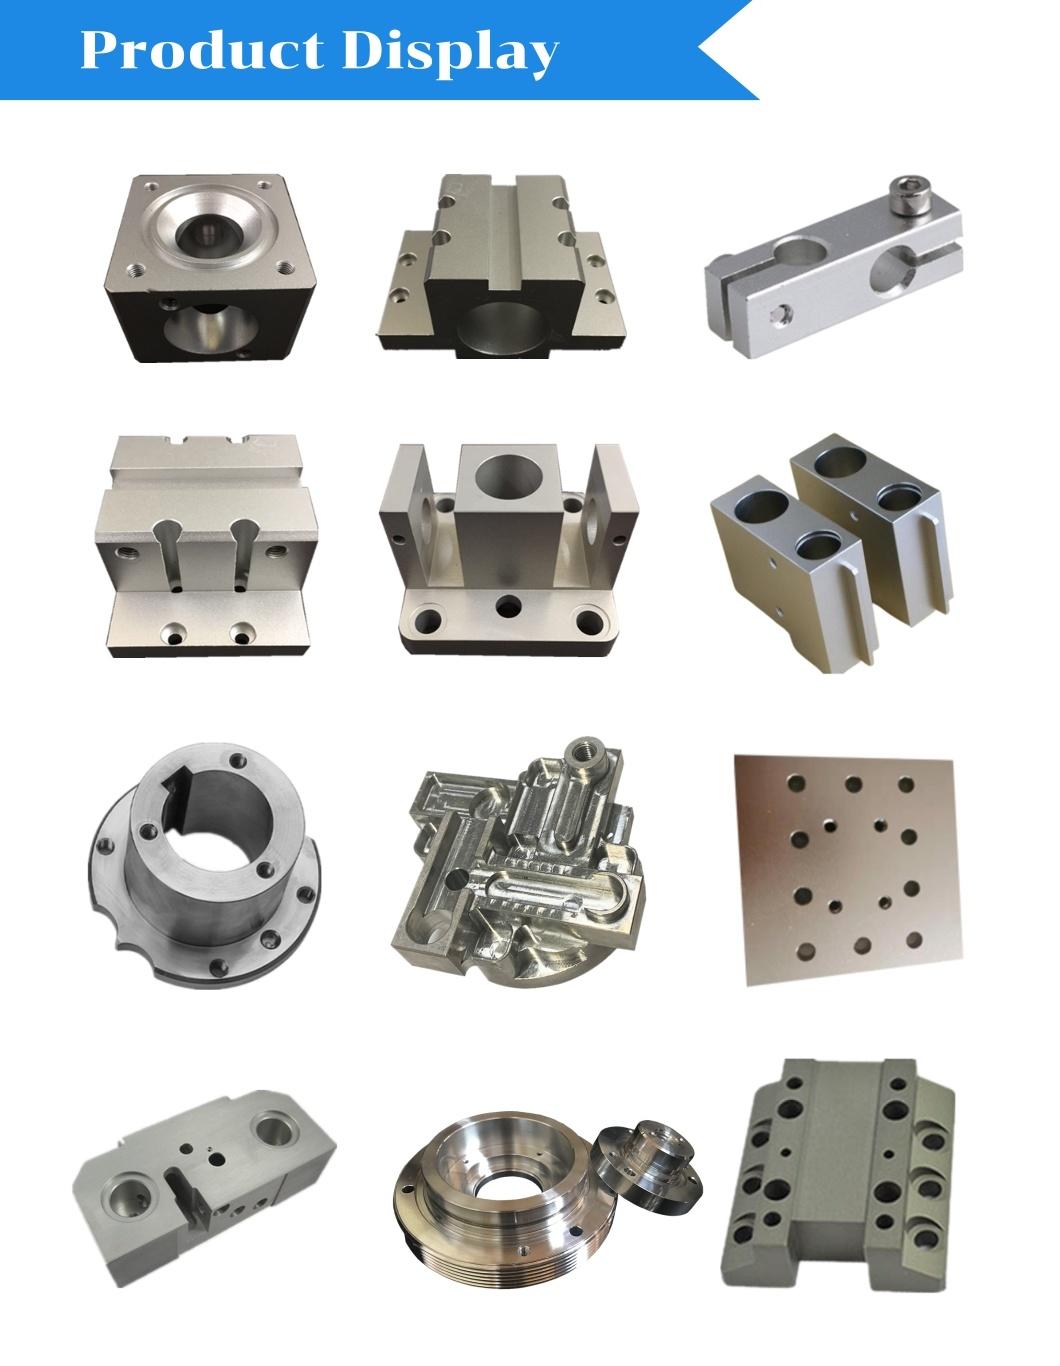 Die-Cast Aluminum Alloy Mechanical Forgings at Favorable Prices